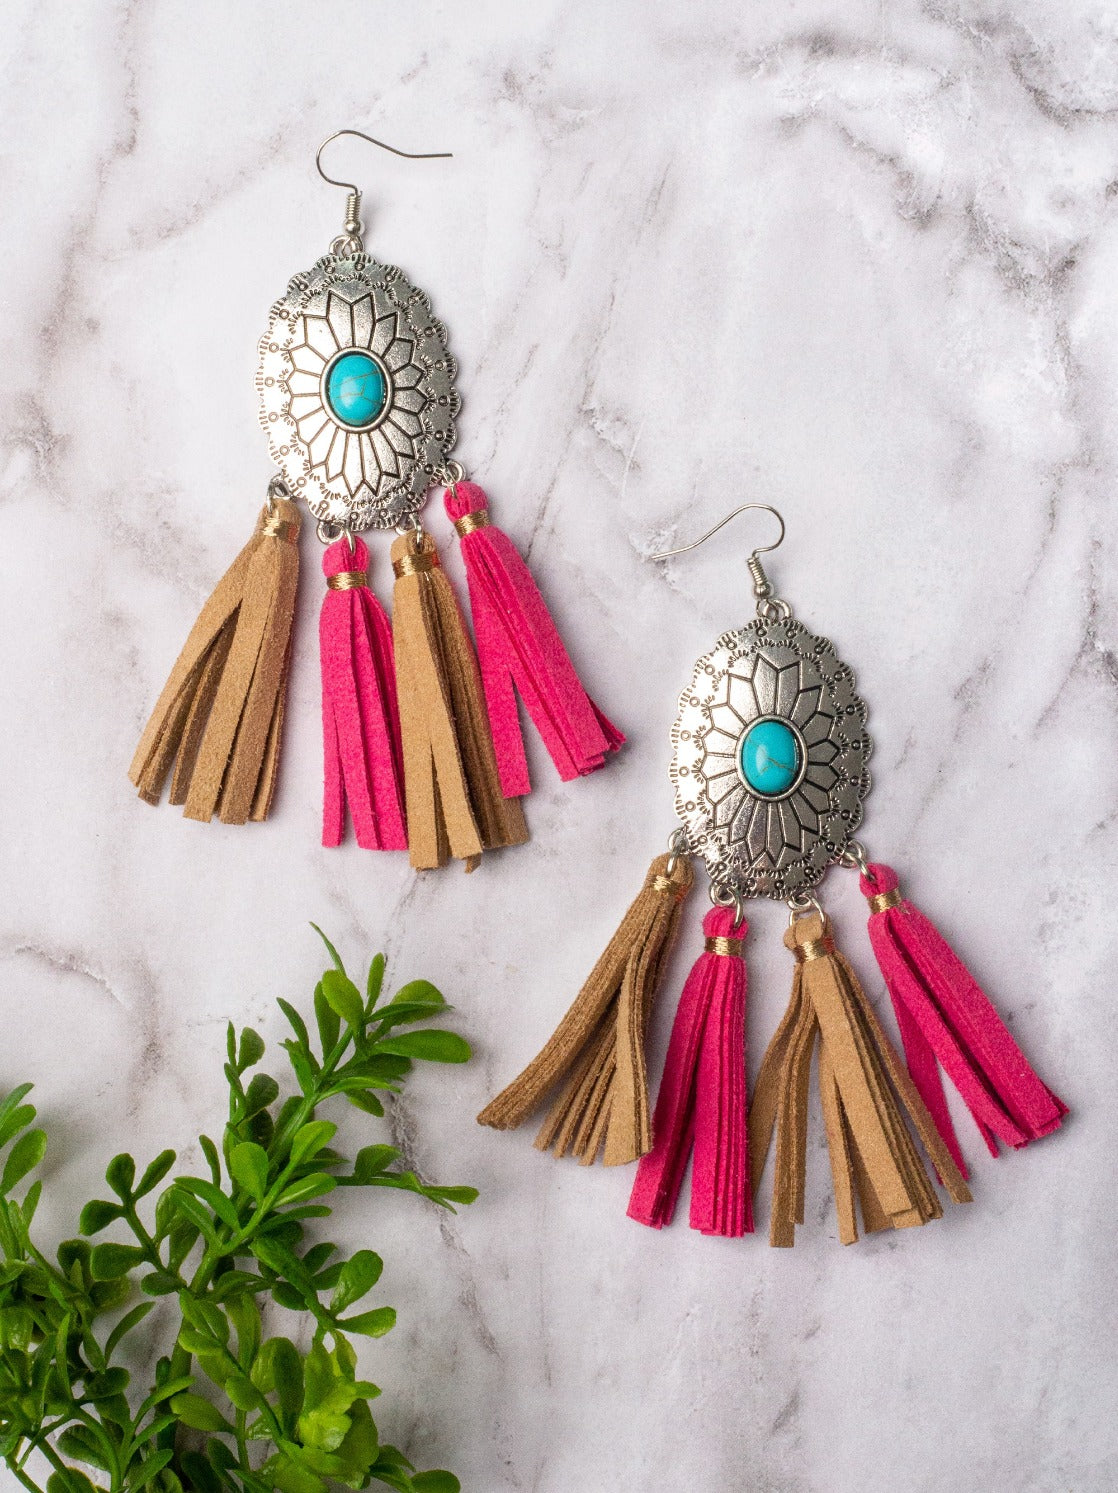 KICK ROCKS COWBOY TURQUOISE CONCHO WITH PINK AND TAN TASSELS DANGLE EARRINGS